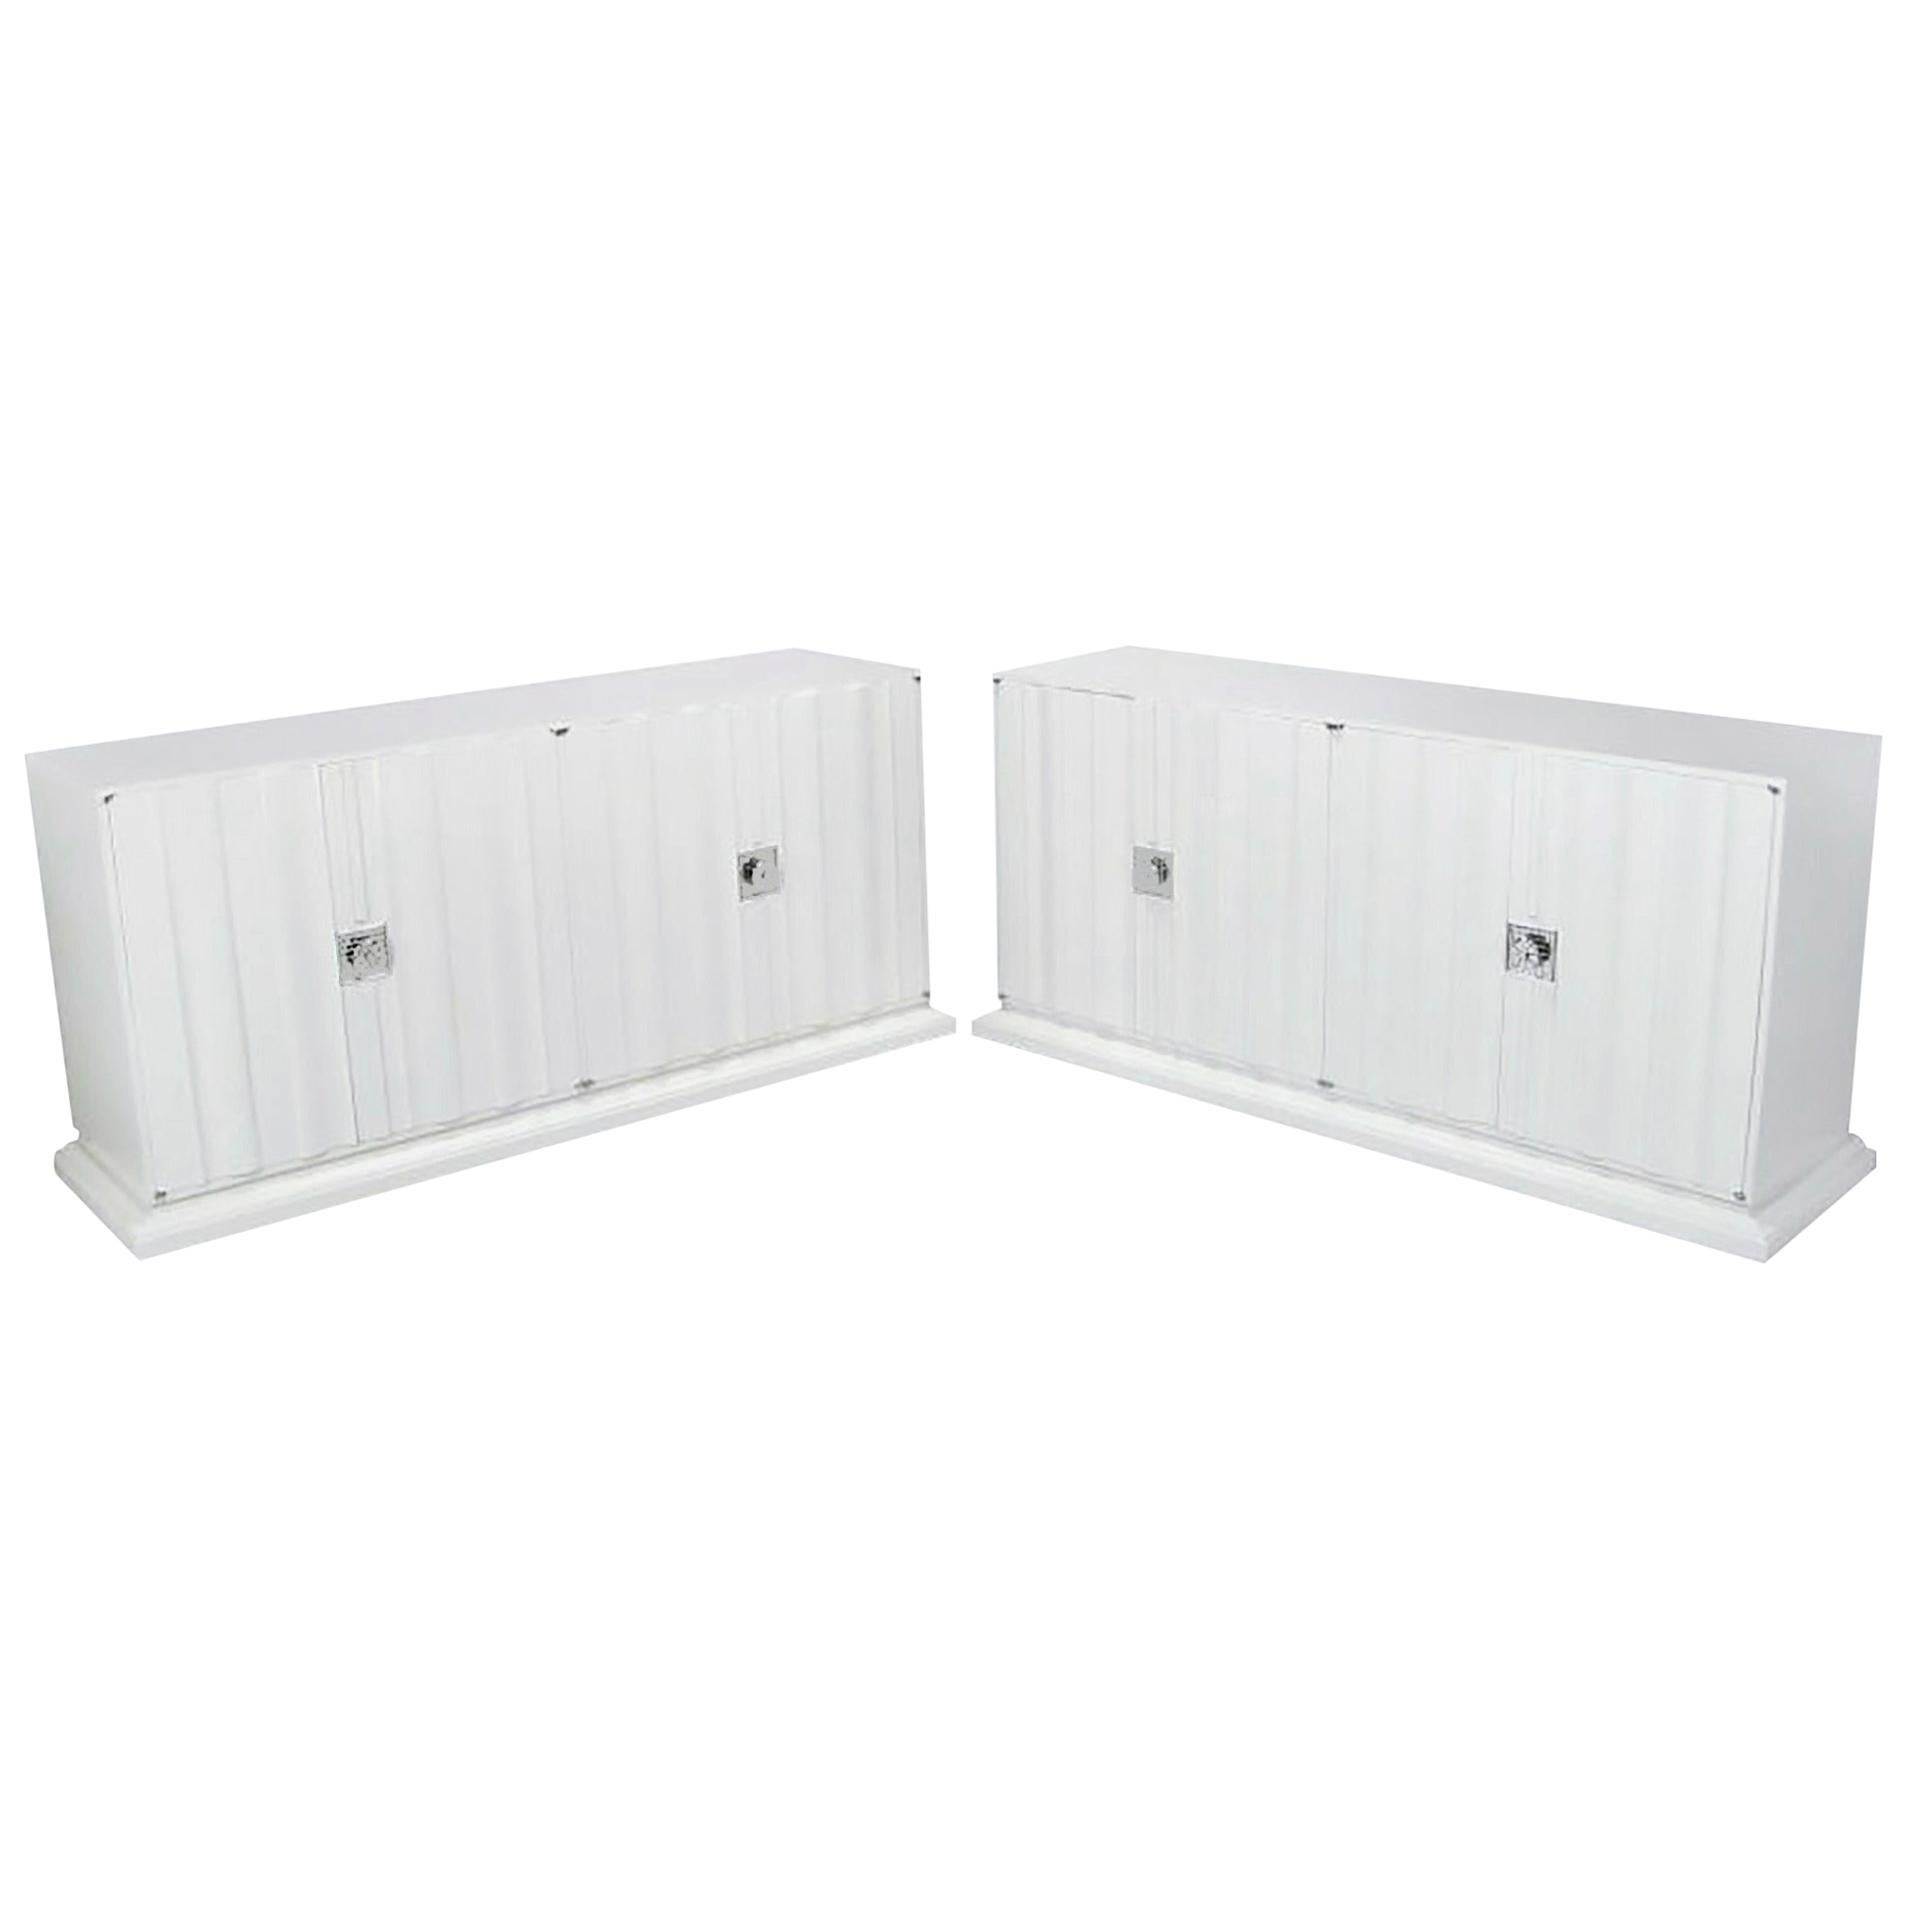 Pair of Custom White Lacquer Linen Fold Cabinets